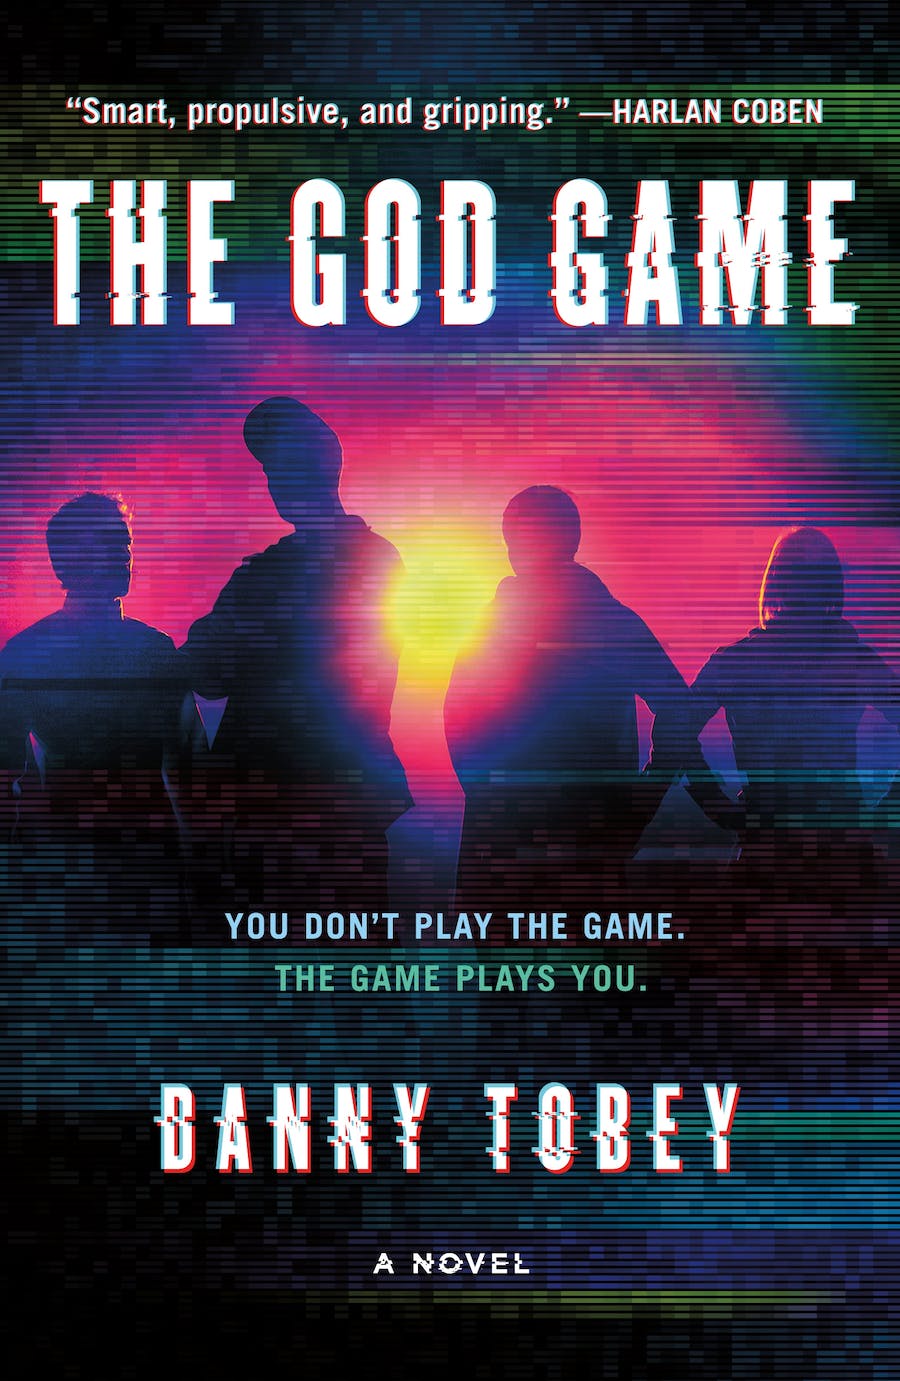 The God Game